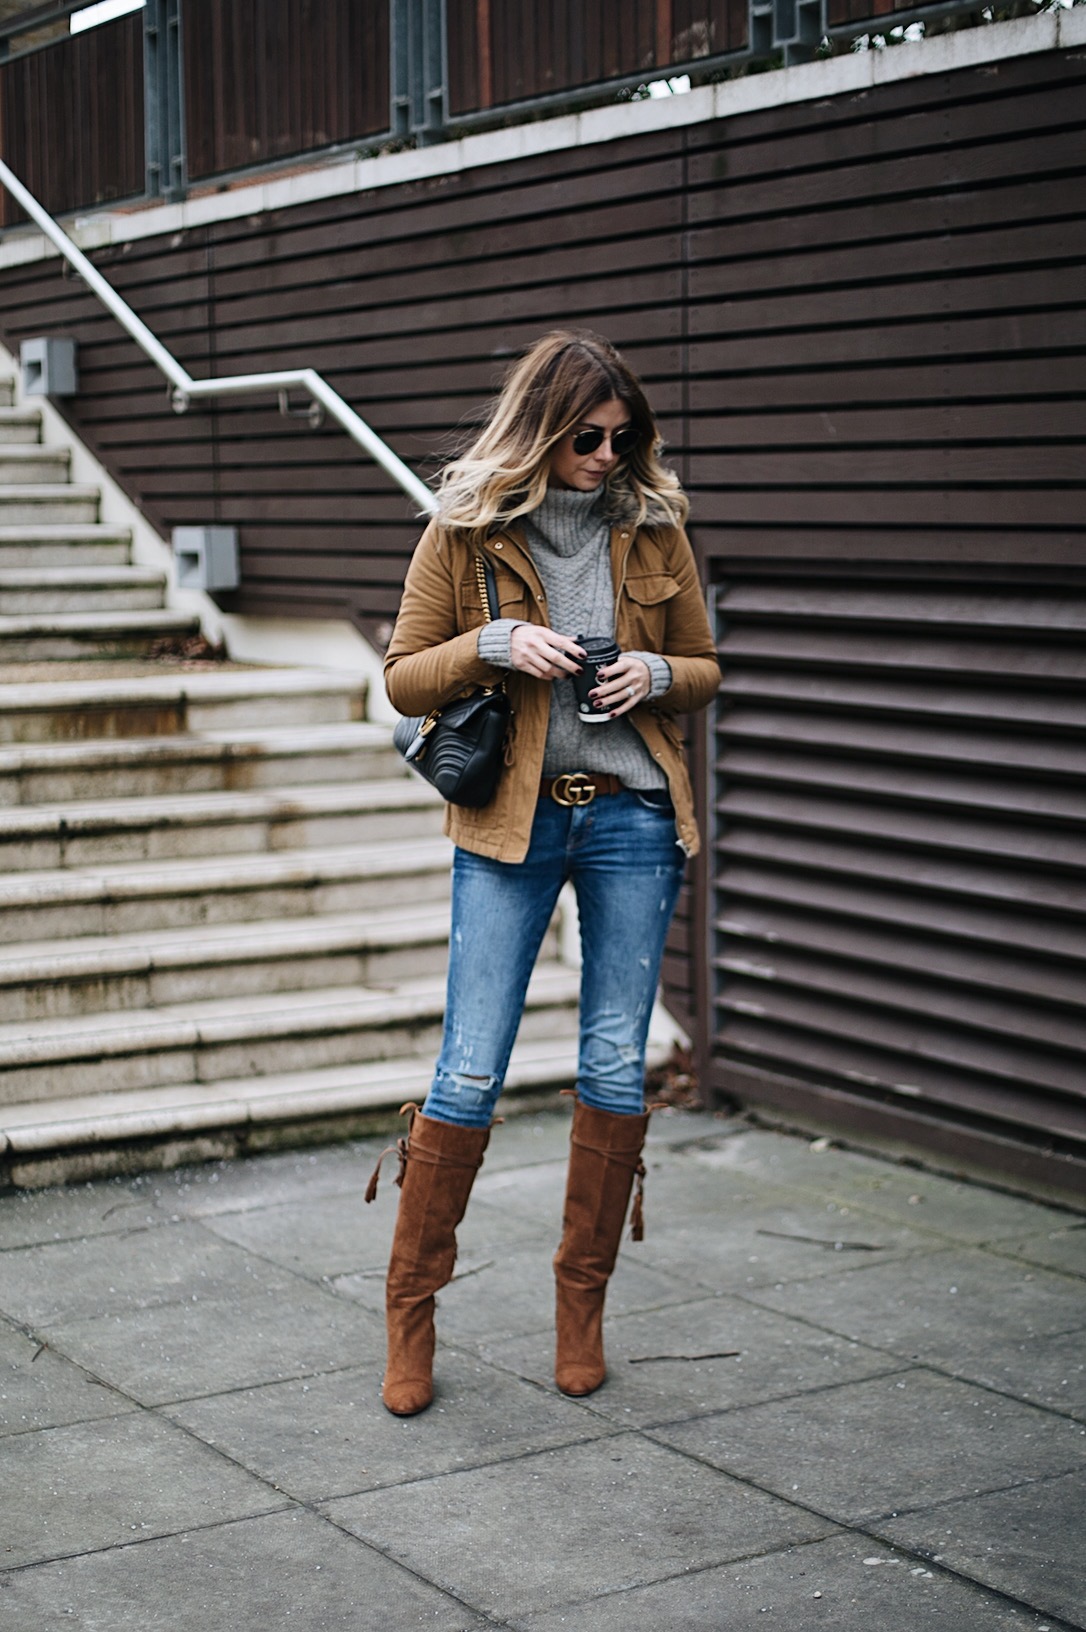 Emma Hill wears tan jacket, Grey cable knit sweater, tan Gucci marmont GG belt, ripped skinny jeans, tan suede knee high boots, black leather medium Gucci Marmont bag, chic winter outfit